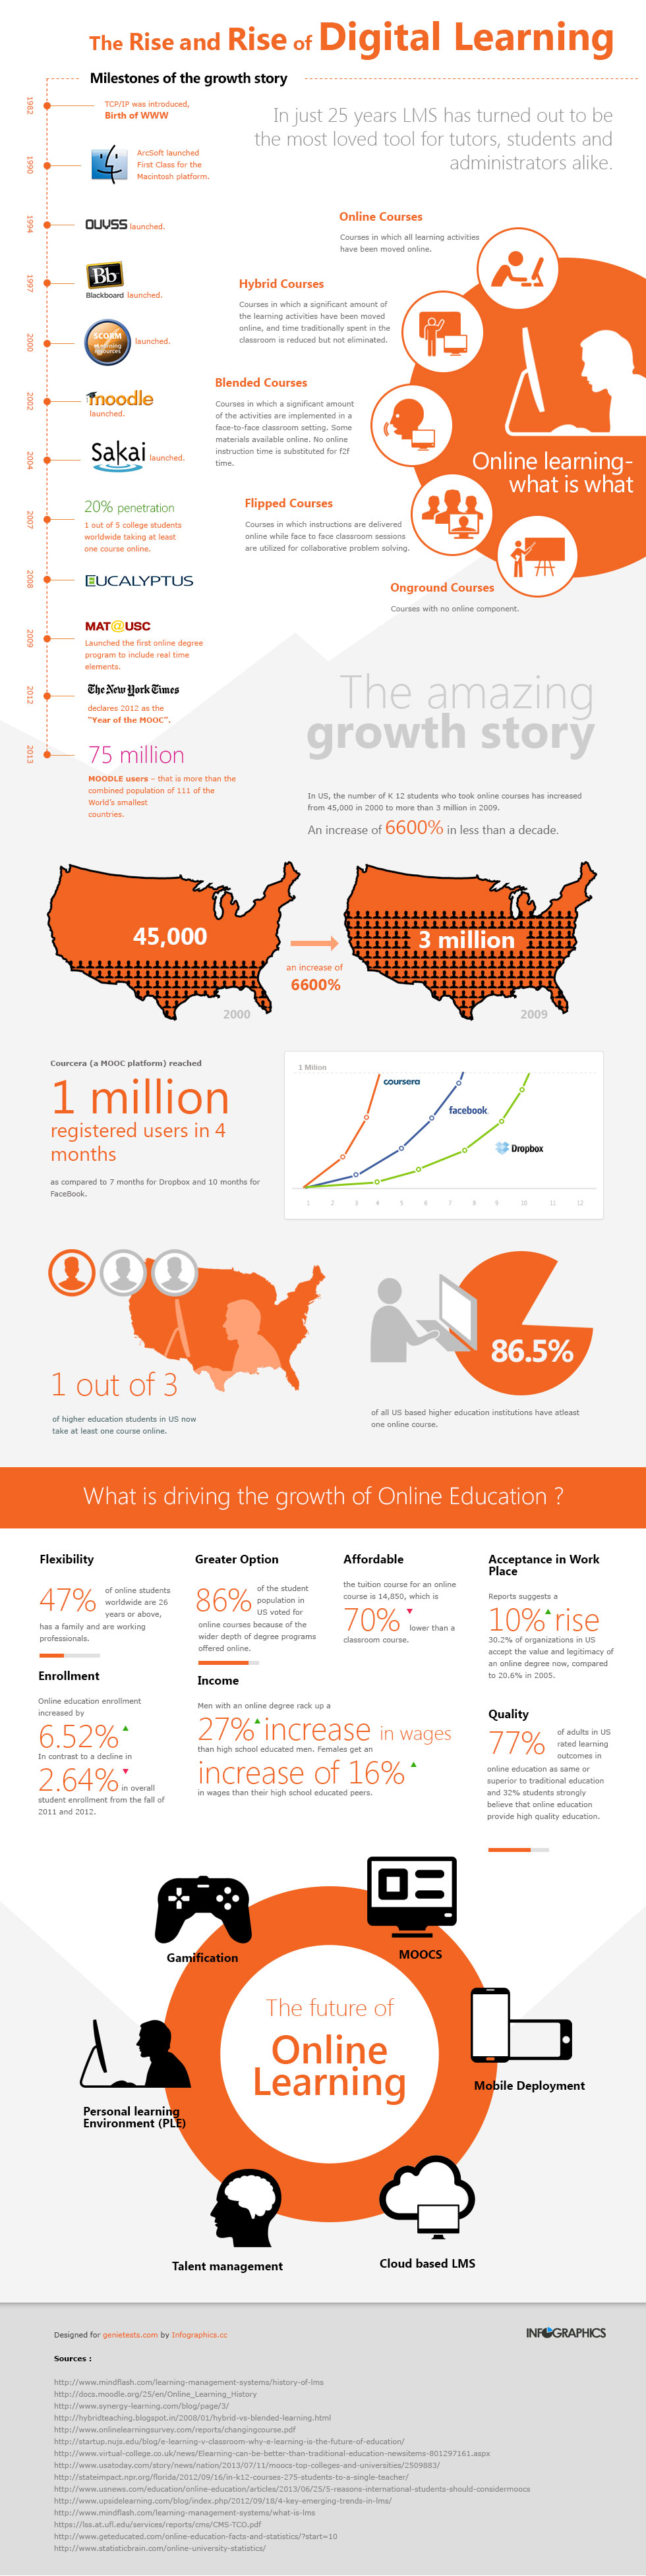 The Rise and Rise of Digital Education